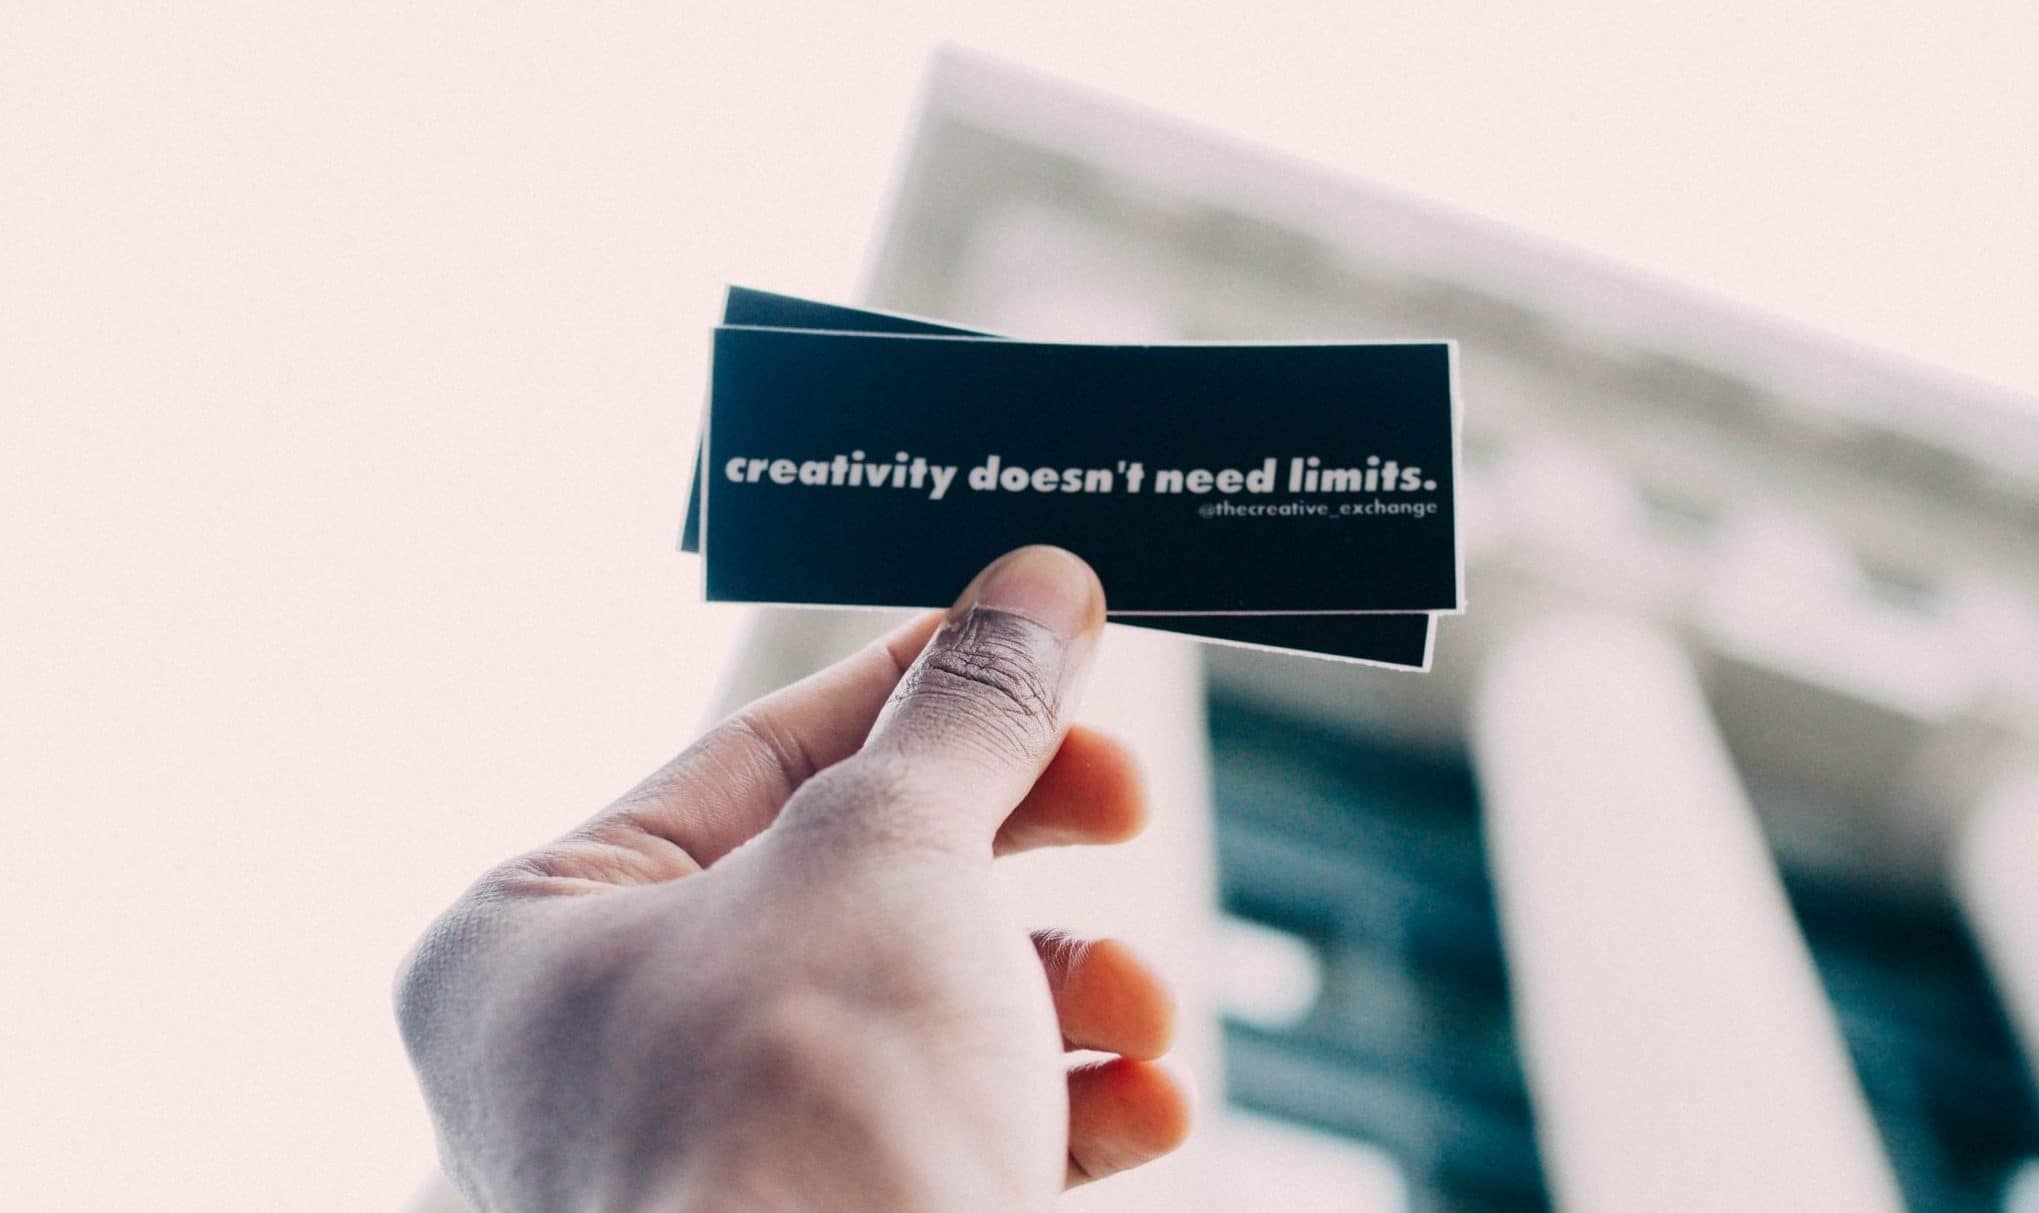 Photo of a man's hand holding a business card with a quote, "creativity doesn't need limits".